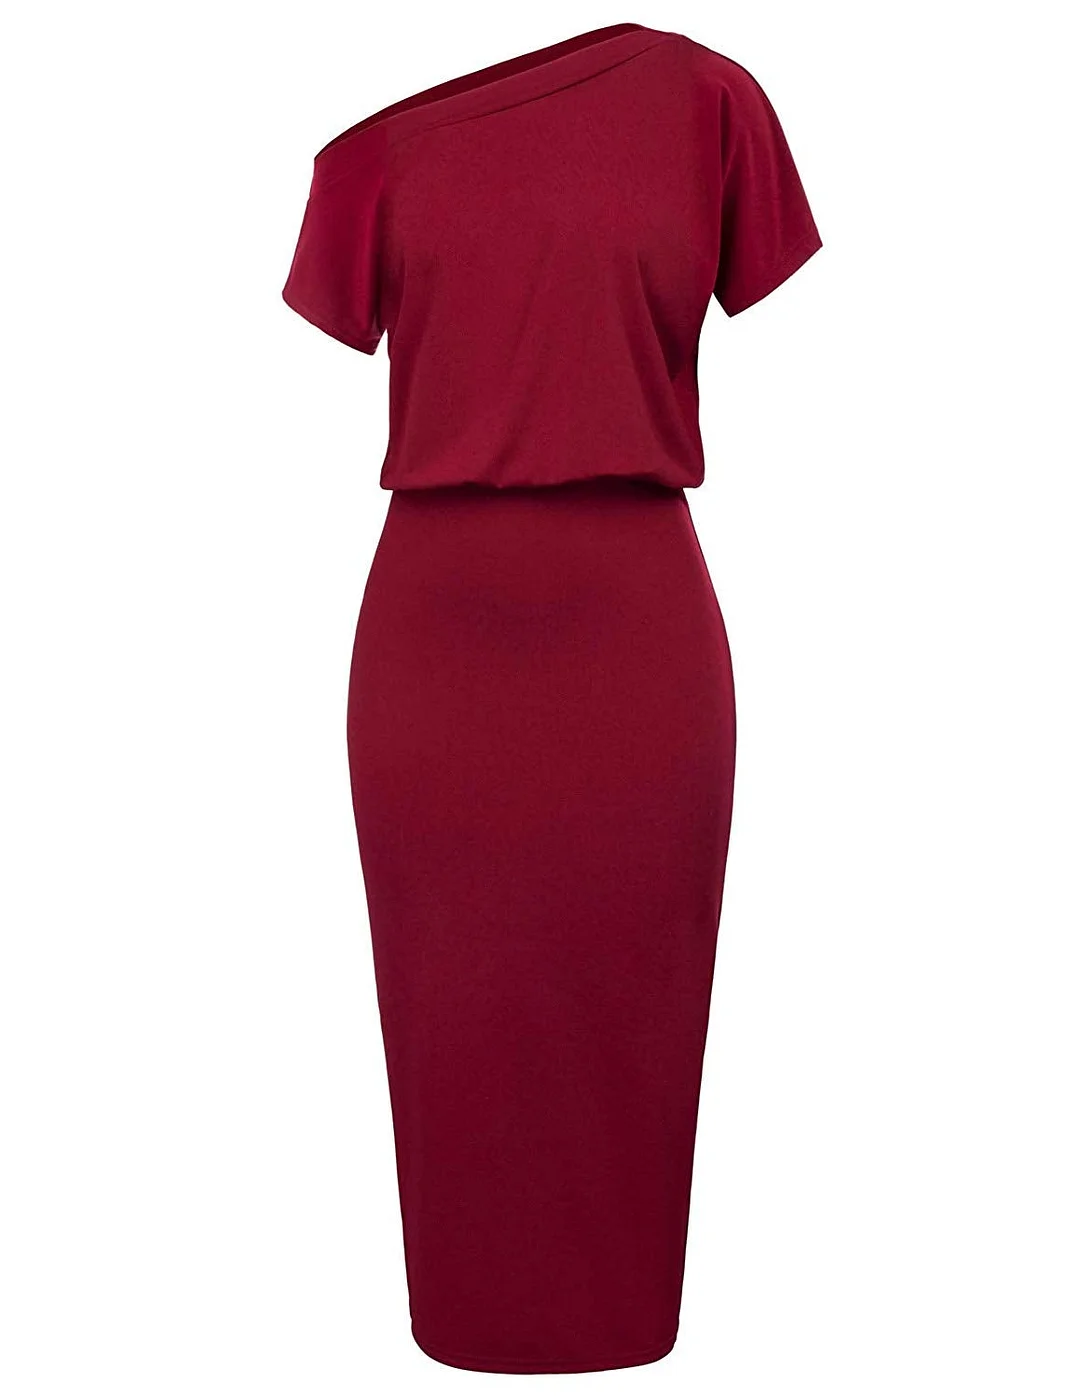 Women’s Sexy One Shoulder Hips-Wrapped Bodycon Party Pencil Dress